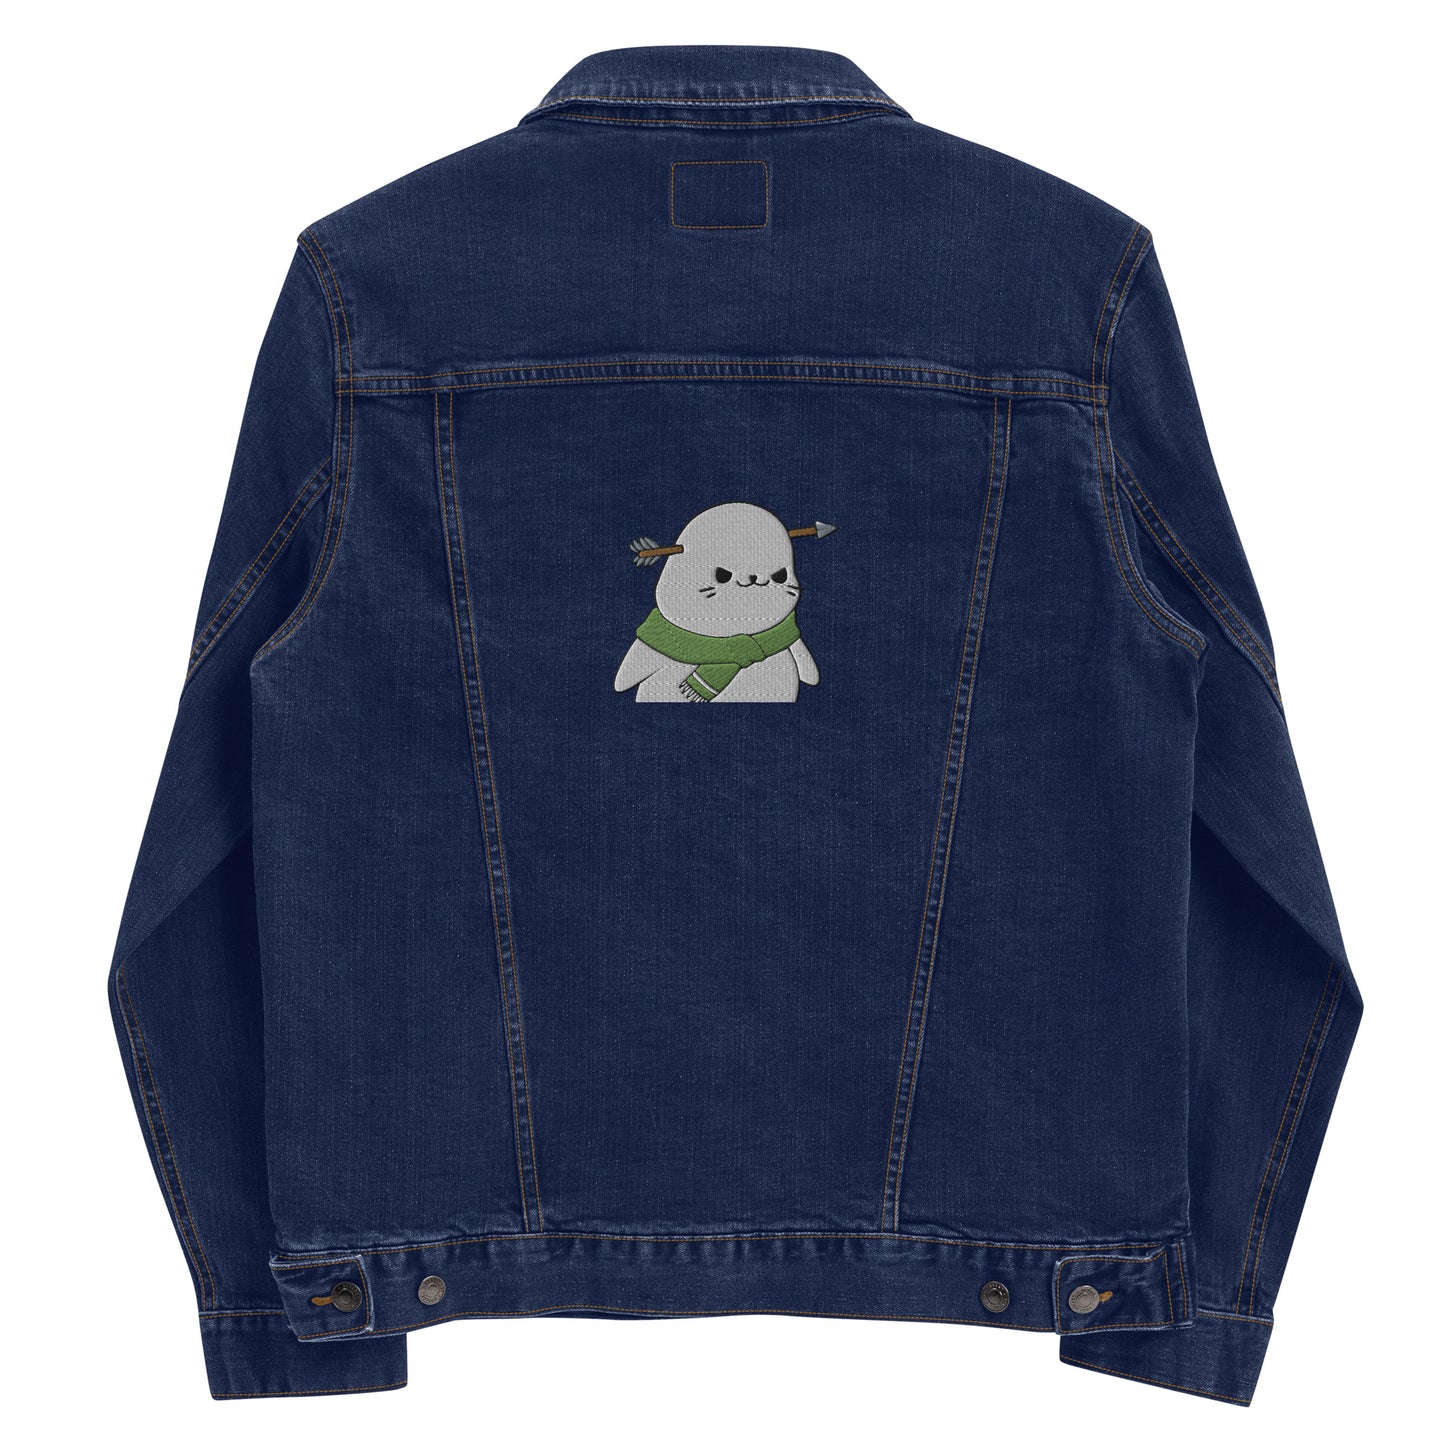 Denim jacket feat. Sappy Seal #344 (embroidered)